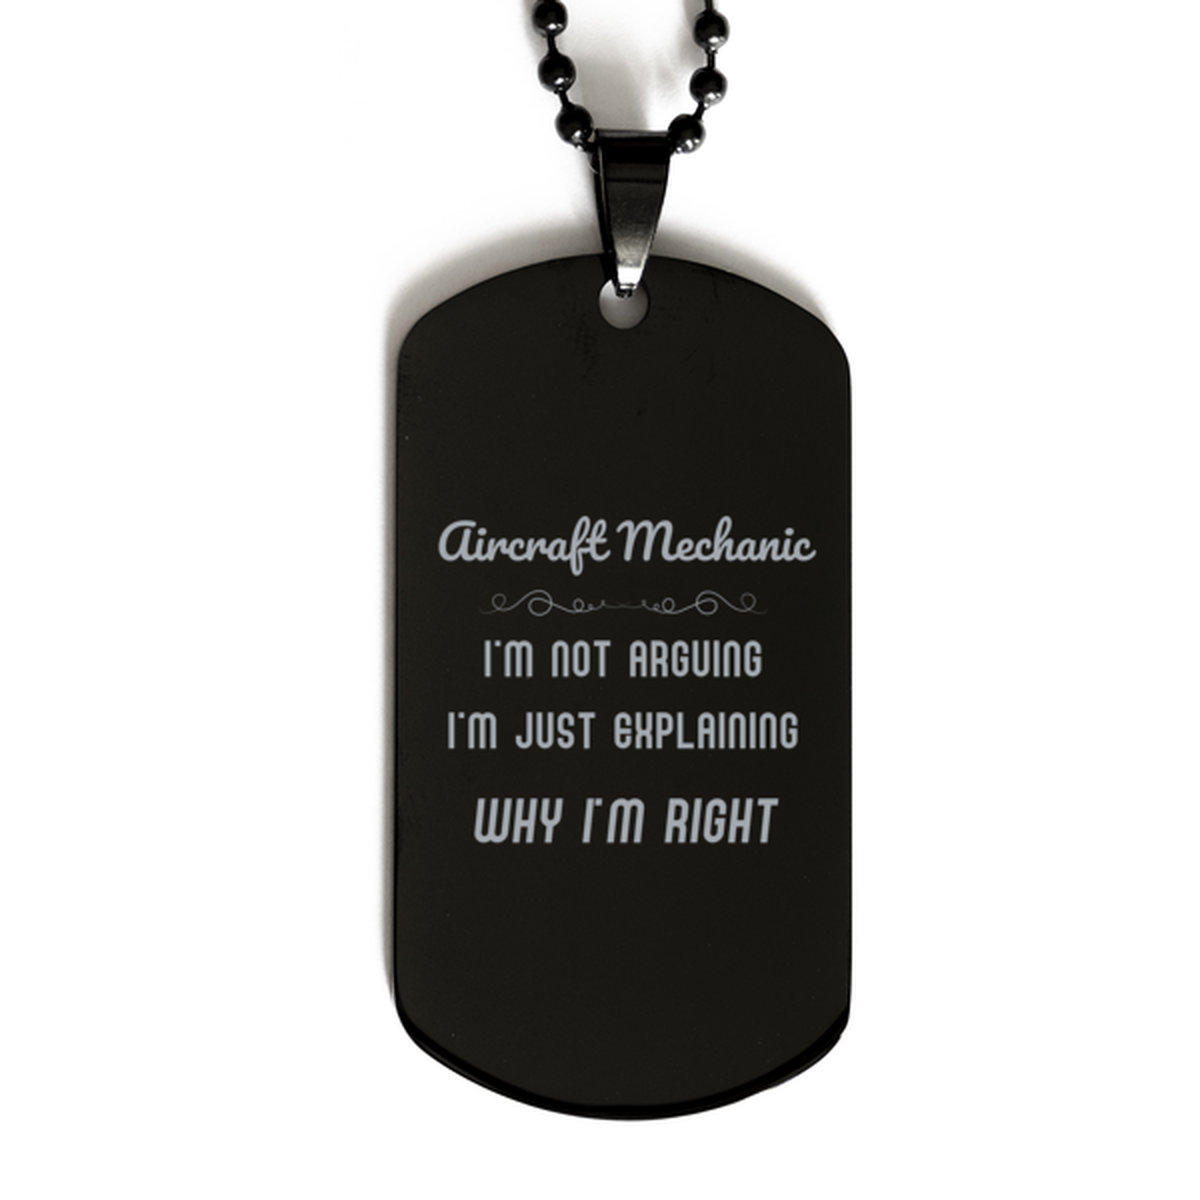 Aircraft Mechanic I'm not Arguing. I'm Just Explaining Why I'm RIGHT Black Dog Tag, Funny Saying Quote Aircraft Mechanic Gifts For Aircraft Mechanic Graduation Birthday Christmas Gifts for Men Women Coworker